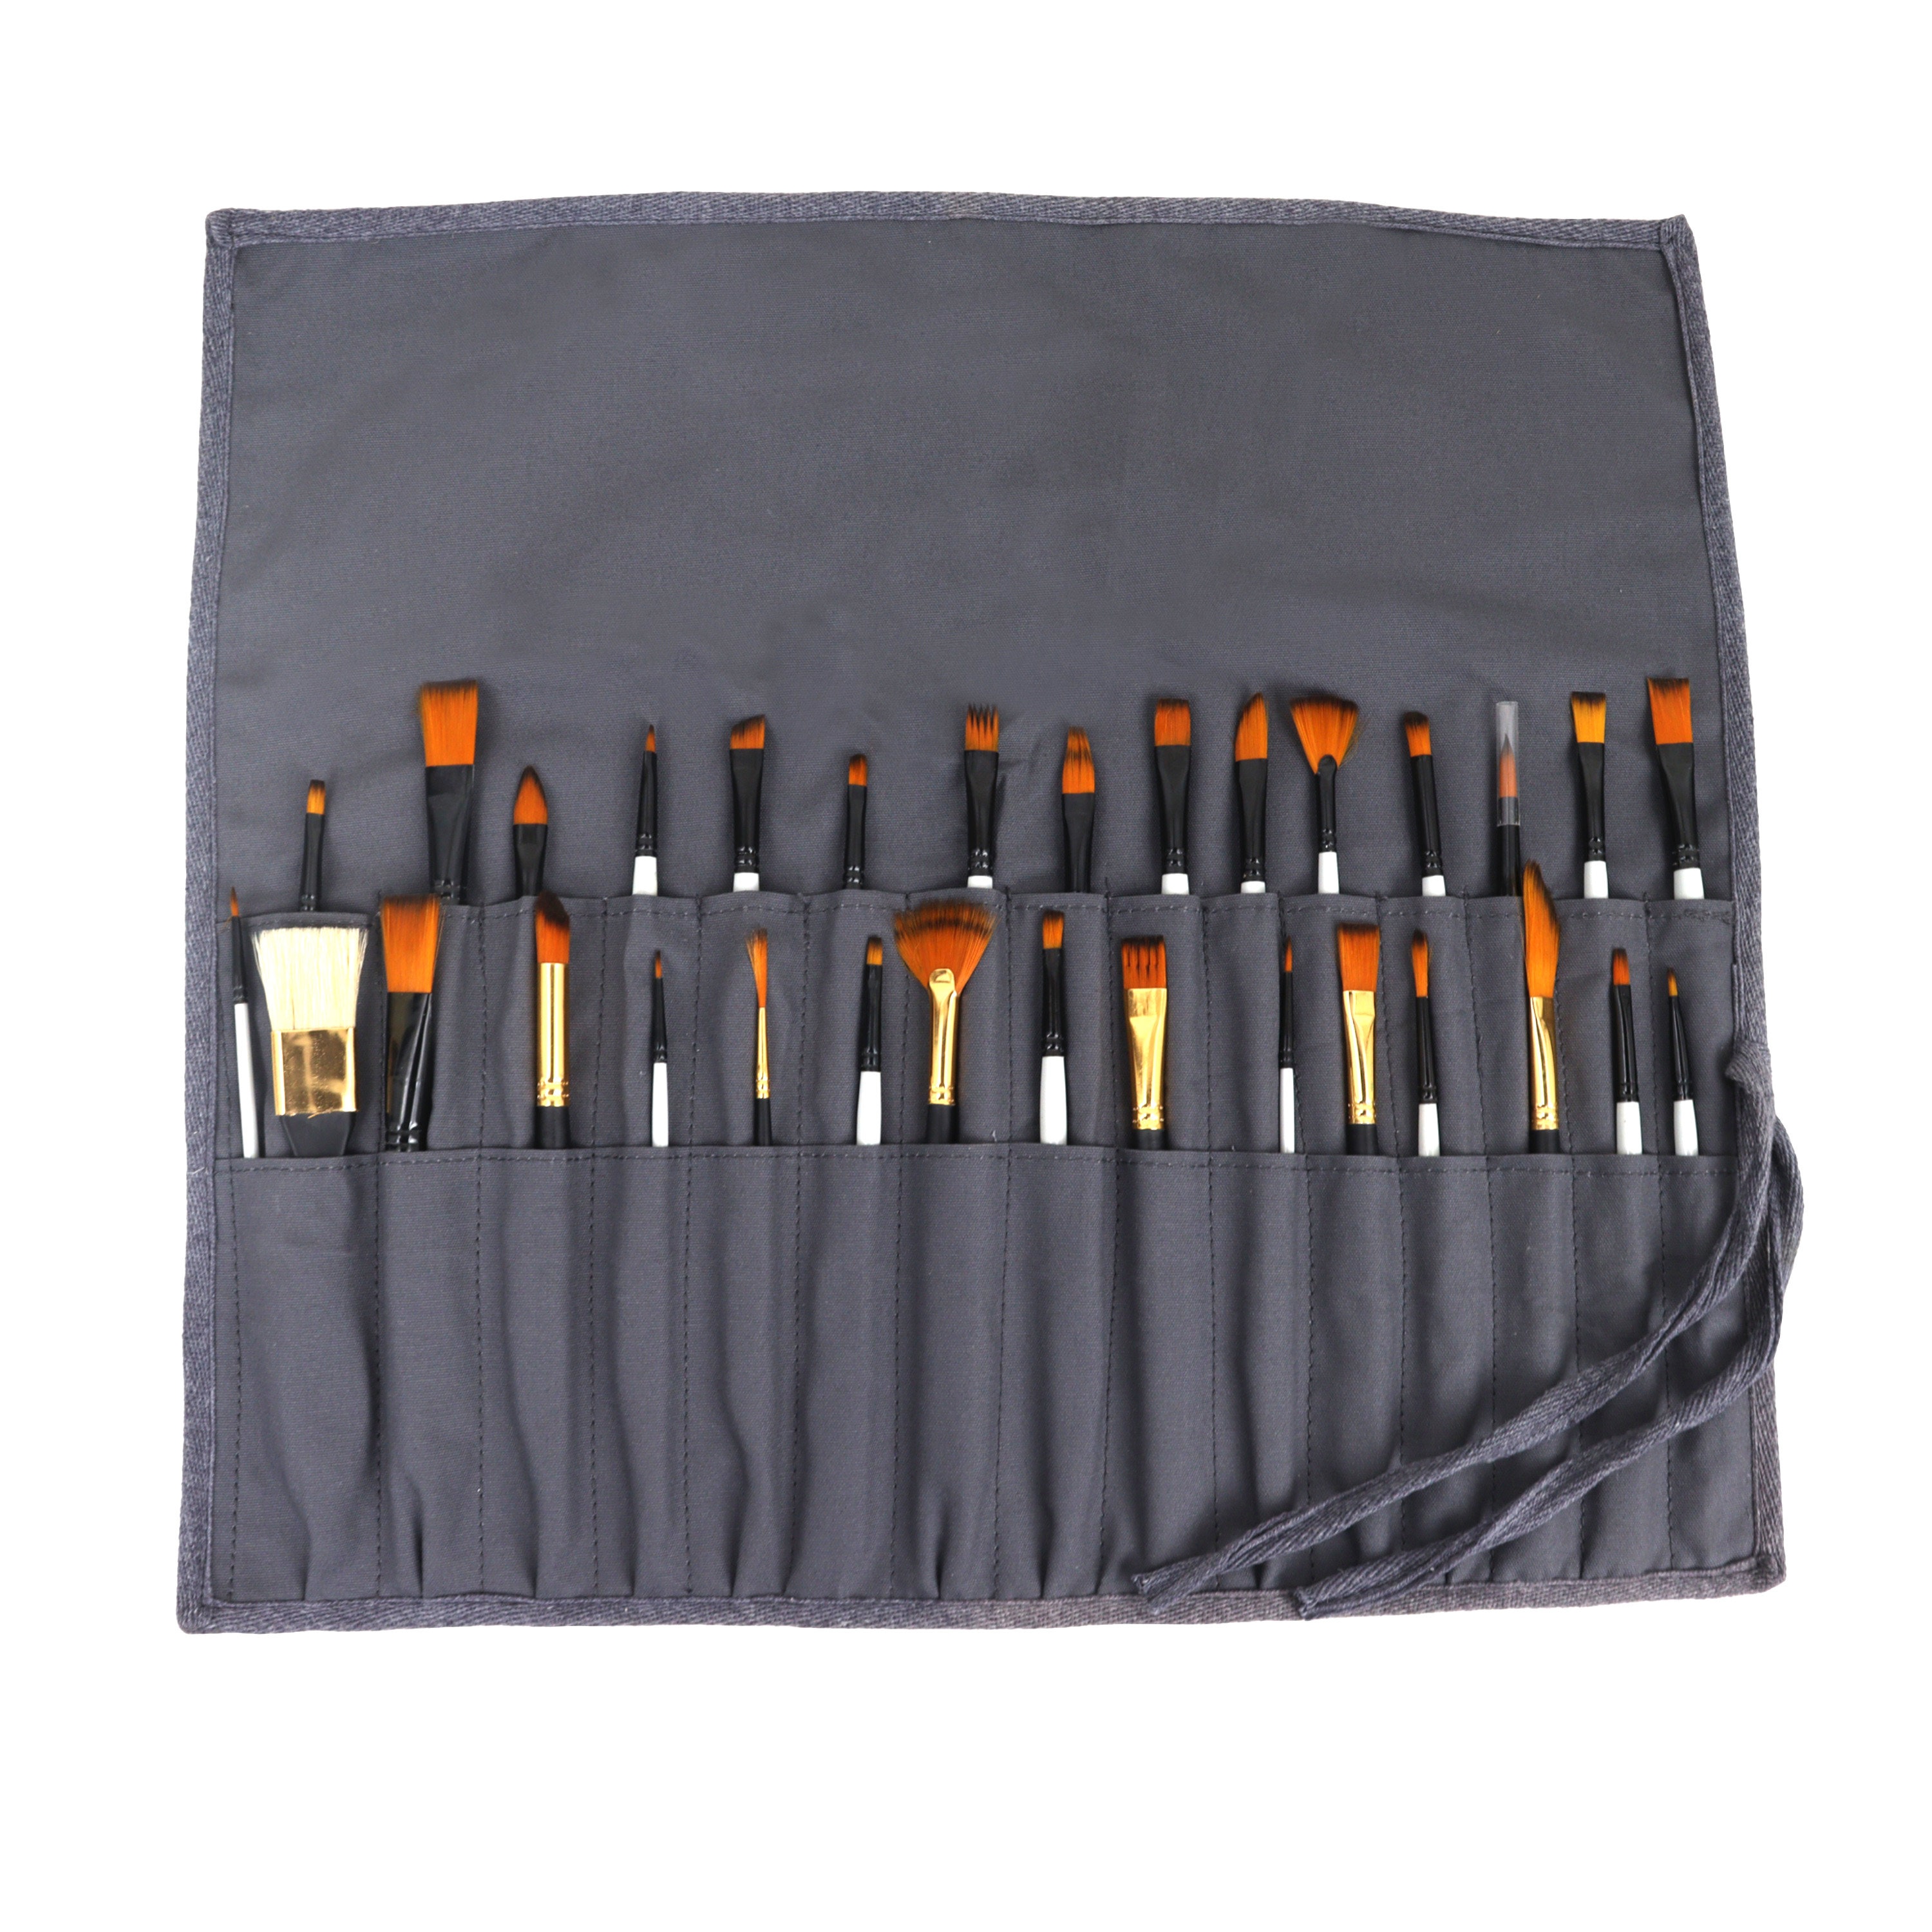 Paint Brush Holder - Paintbrush Roll Up Bag - Paintbrush Holder Organizer  Storage Pouch - Gifts for Artist Painters - Pinselrolle